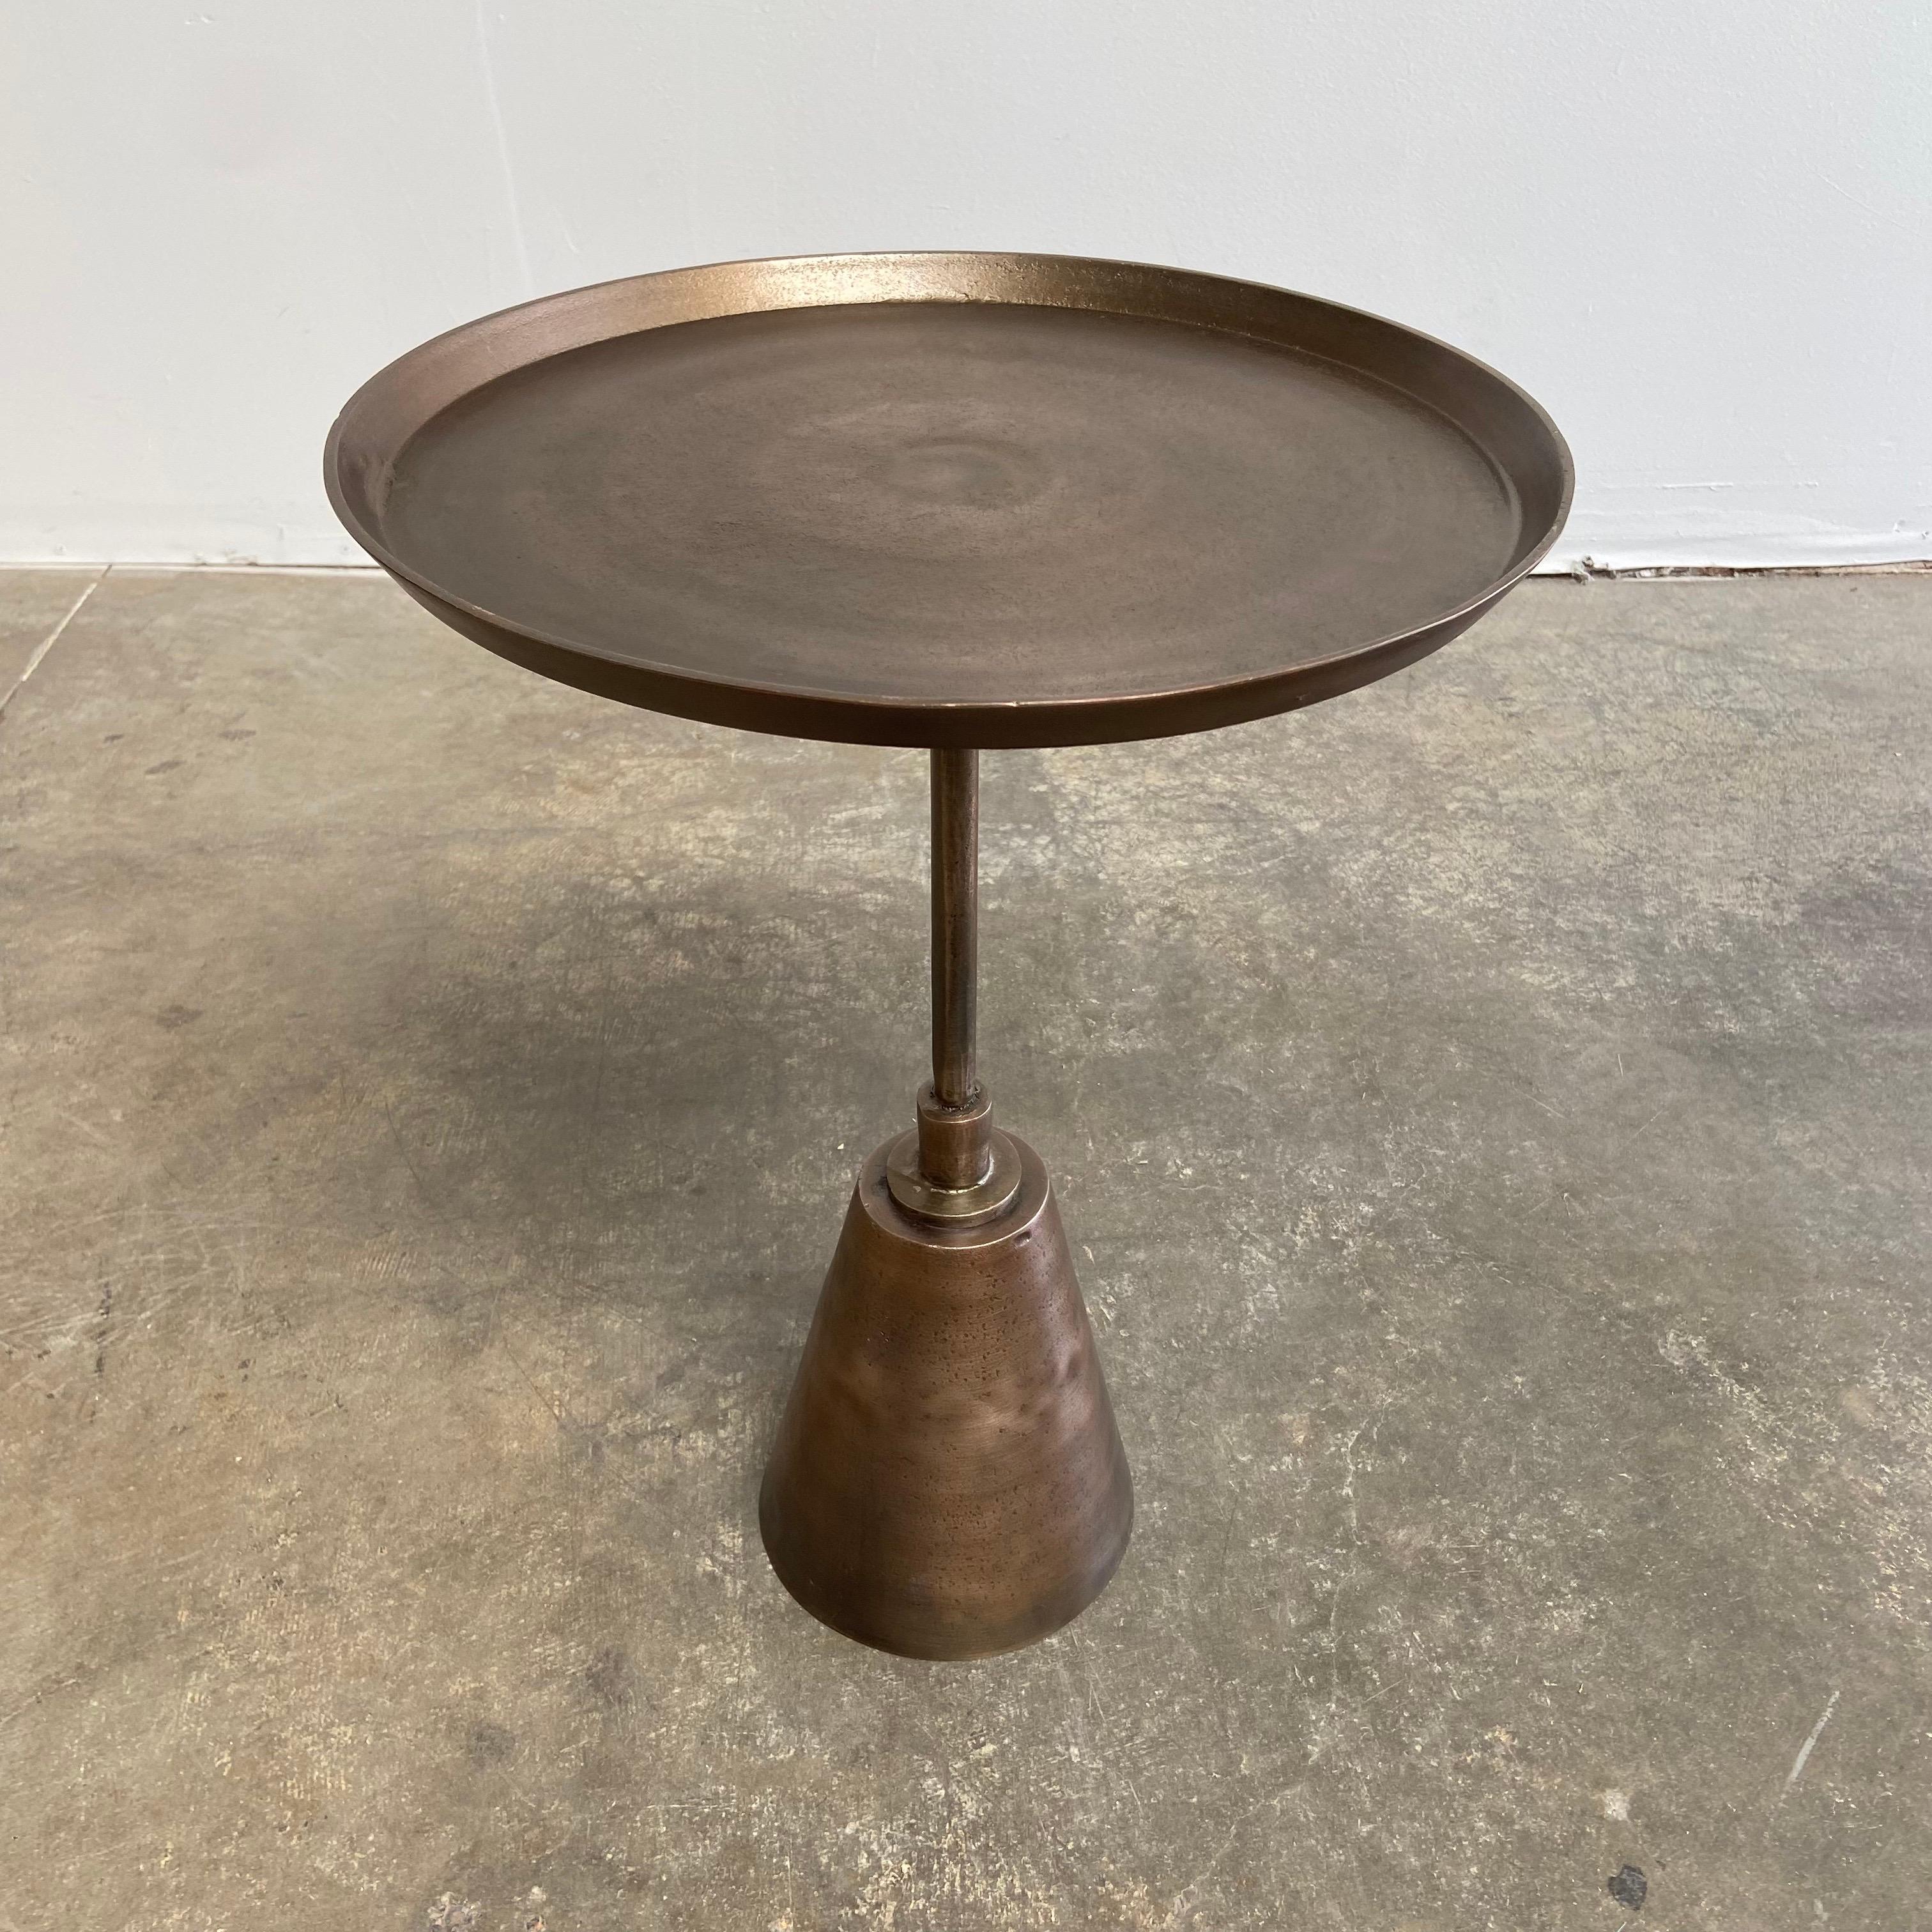 Modern Style Side Table in an Antique Brass Colored Finish 6